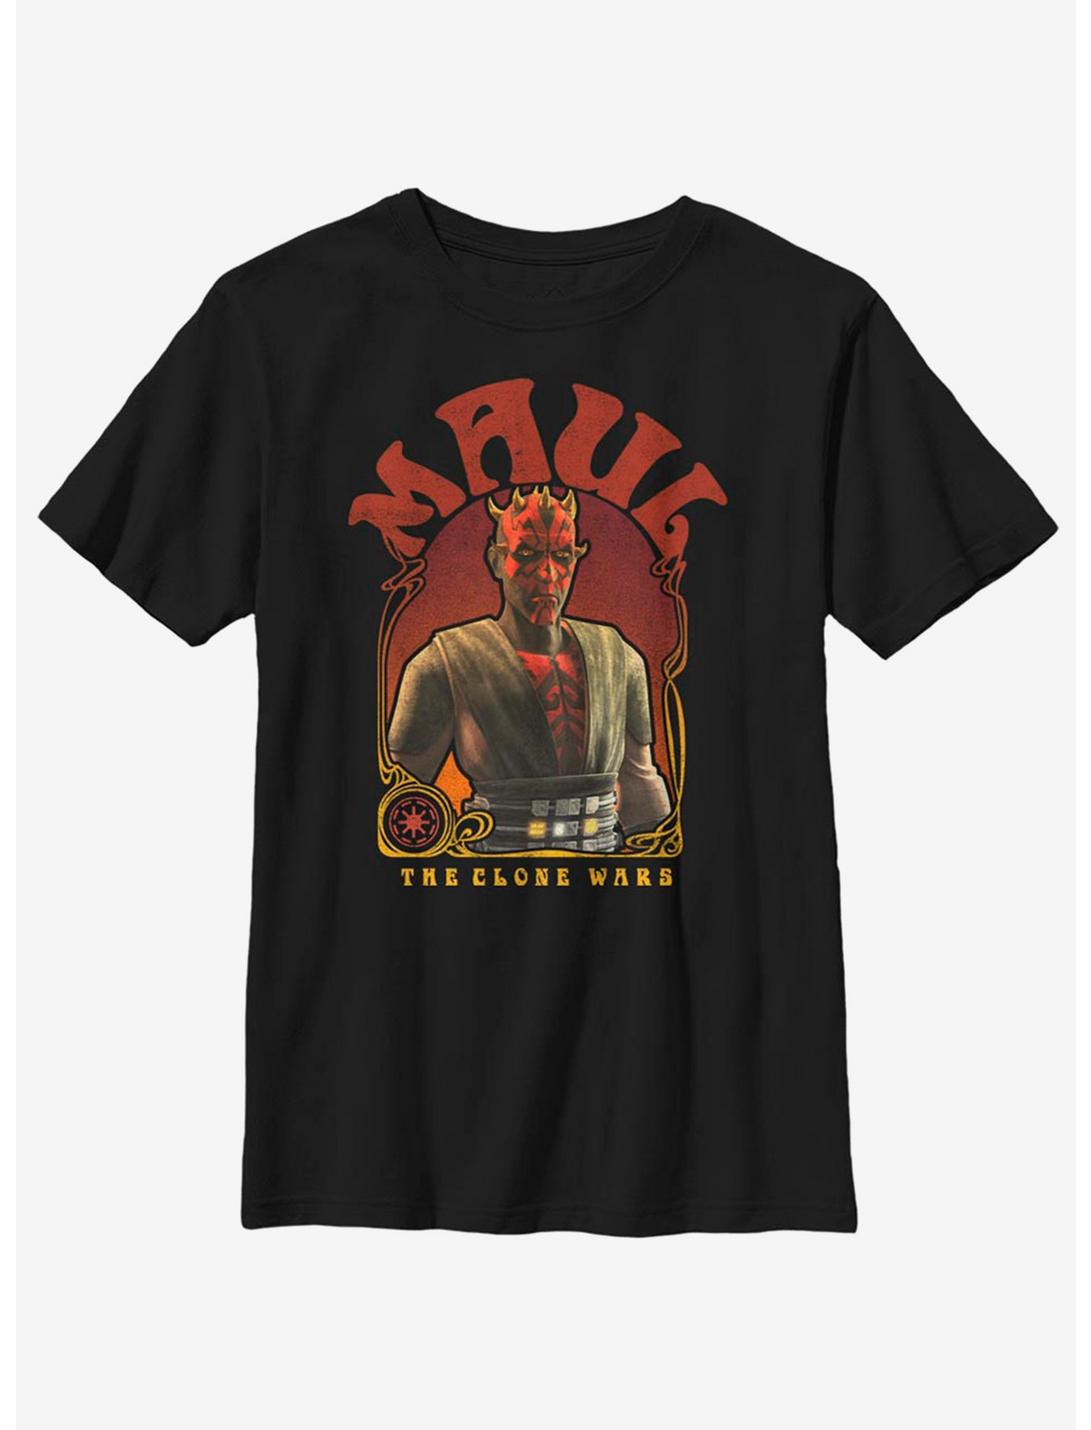 Star Wars: The Clone Wars Maul Nouveau Youth T-Shirt, BLACK, hi-res